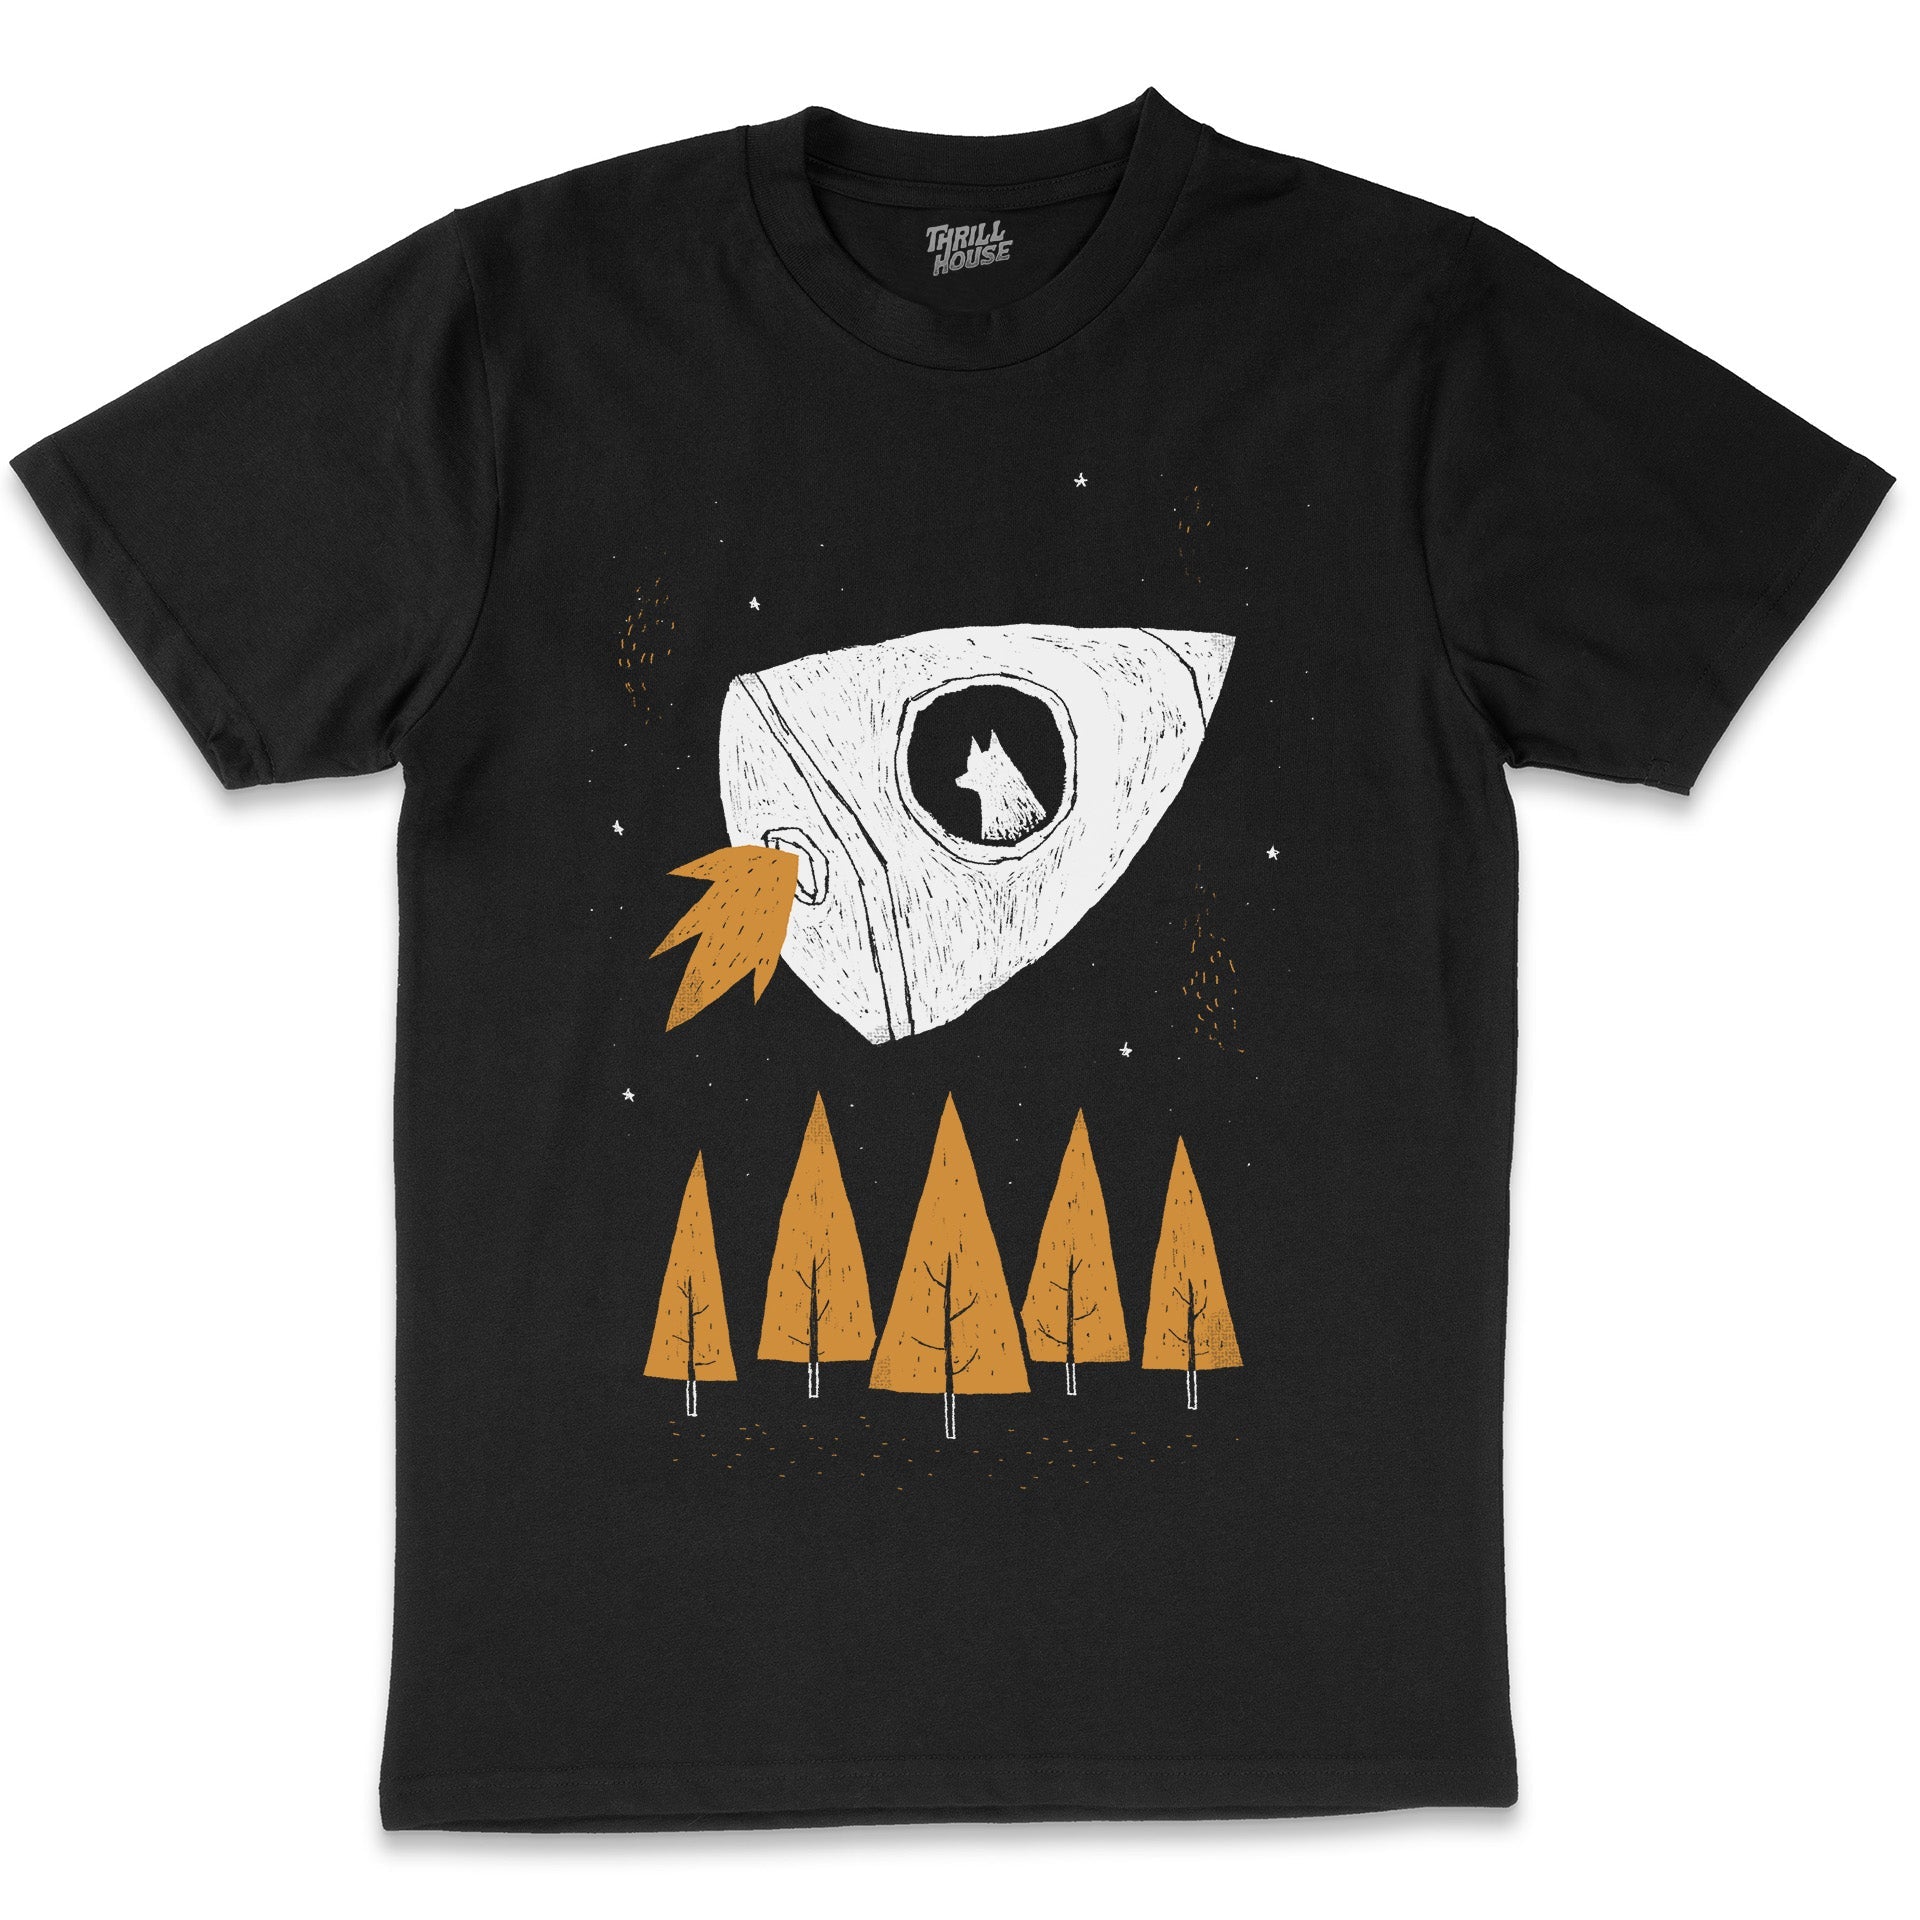 Laika The Space Dog Astronaut Solar System Artsy Planets Sci-Fi Cotton T-Shirt